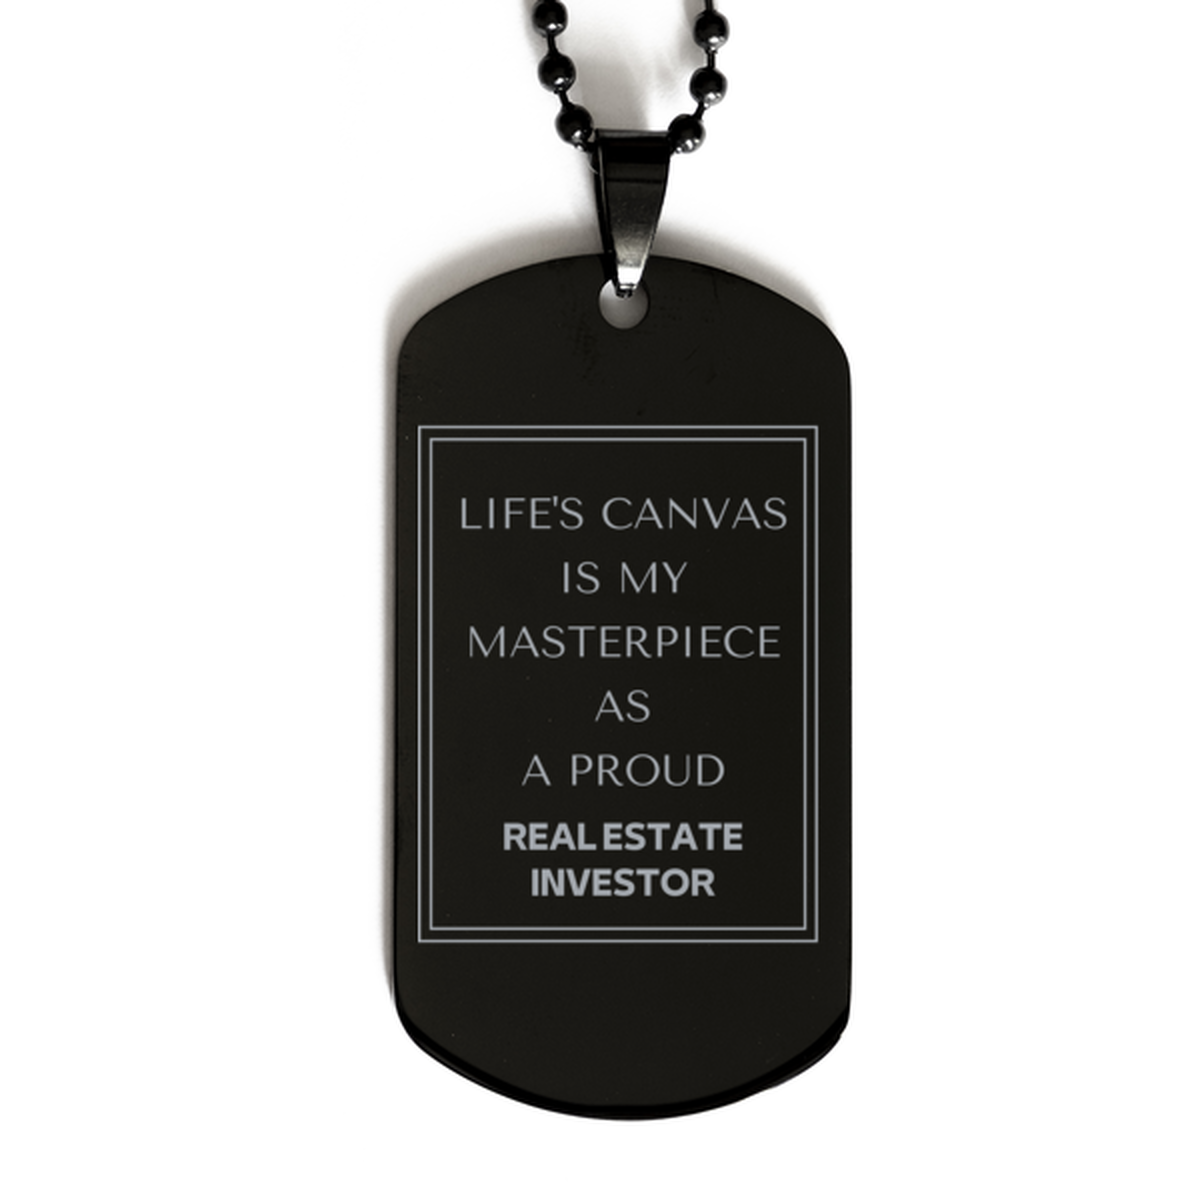 Proud Real Estate Investor Gifts, Life's canvas is my masterpiece, Epic Birthday Christmas Unique Black Dog Tag For Real Estate Investor, Coworkers, Men, Women, Friends